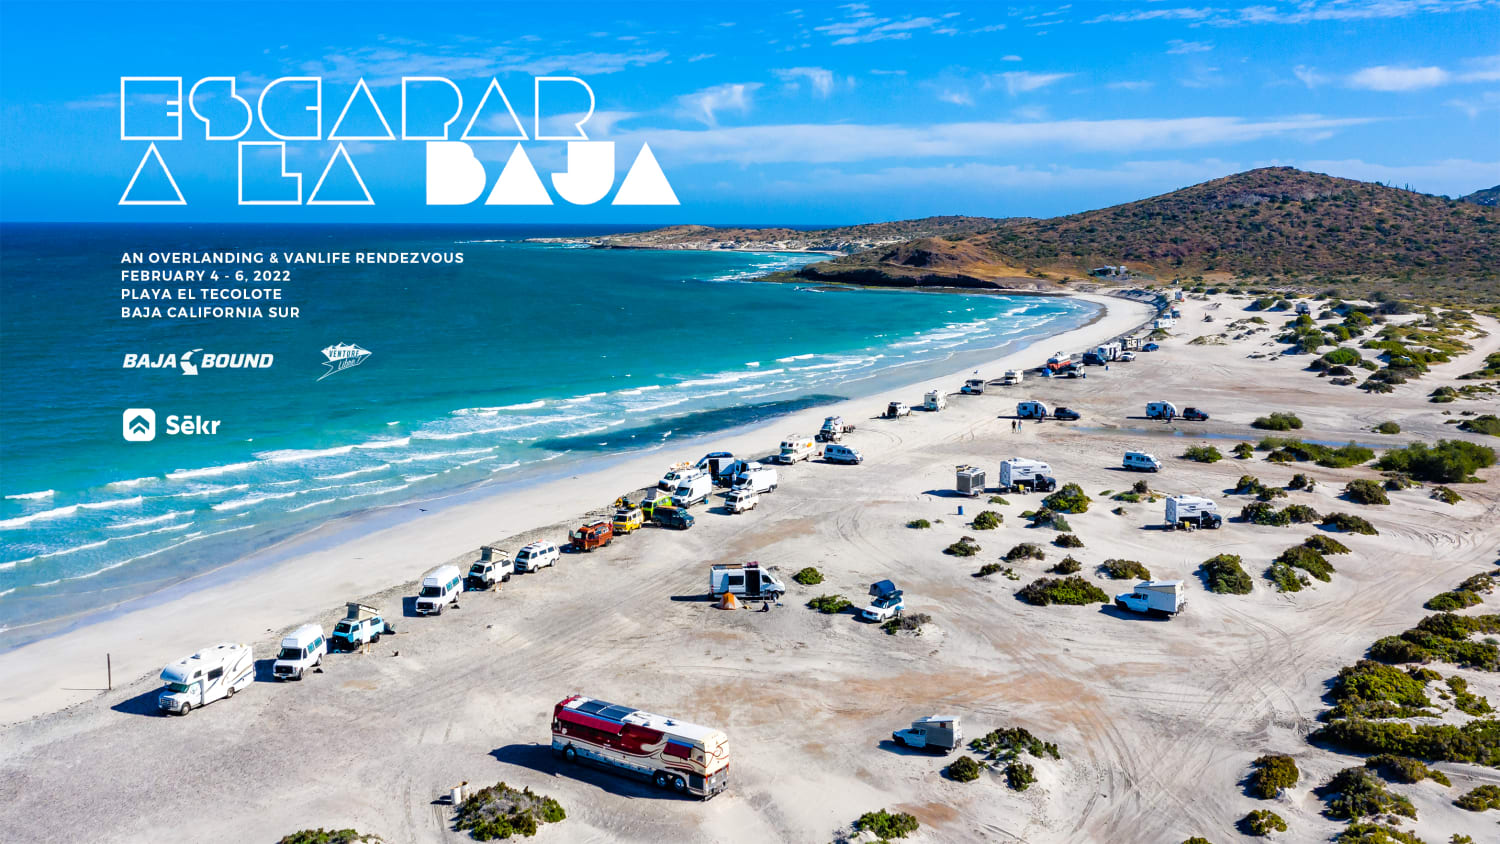 Who is going to Baja this winter for Escapar?